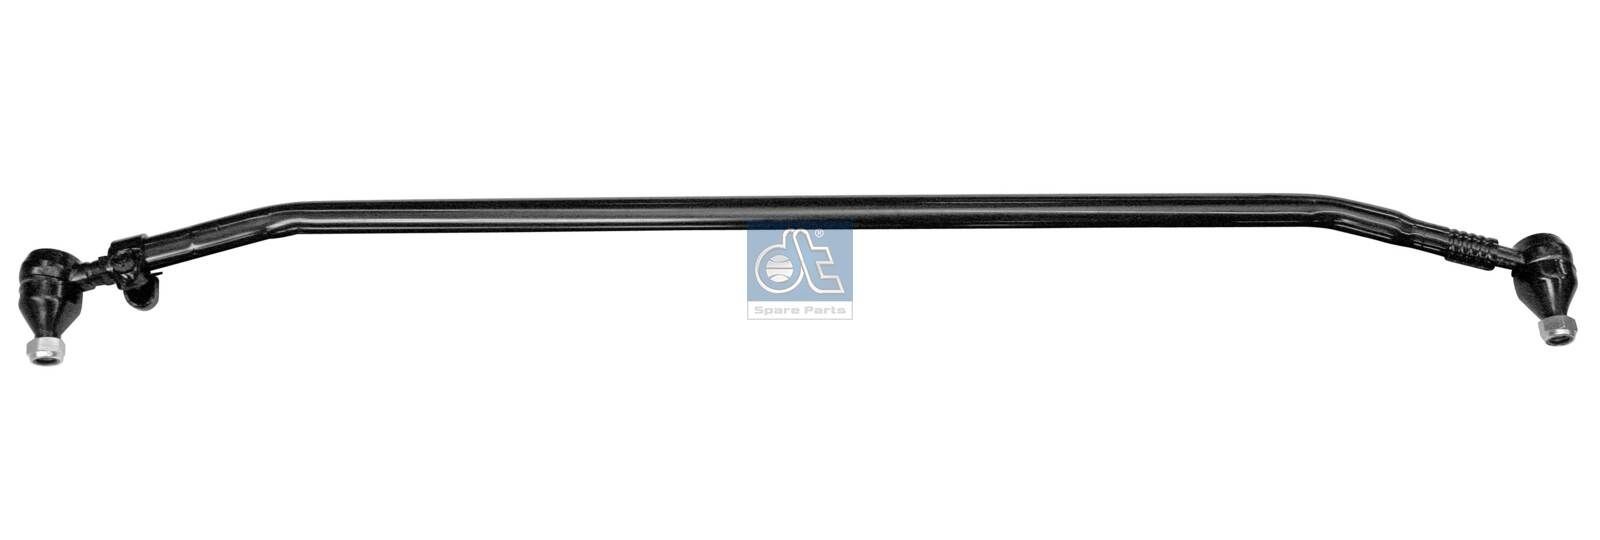 DT Spare Parts 3.63004 Rod Assembly 81 46711 6964